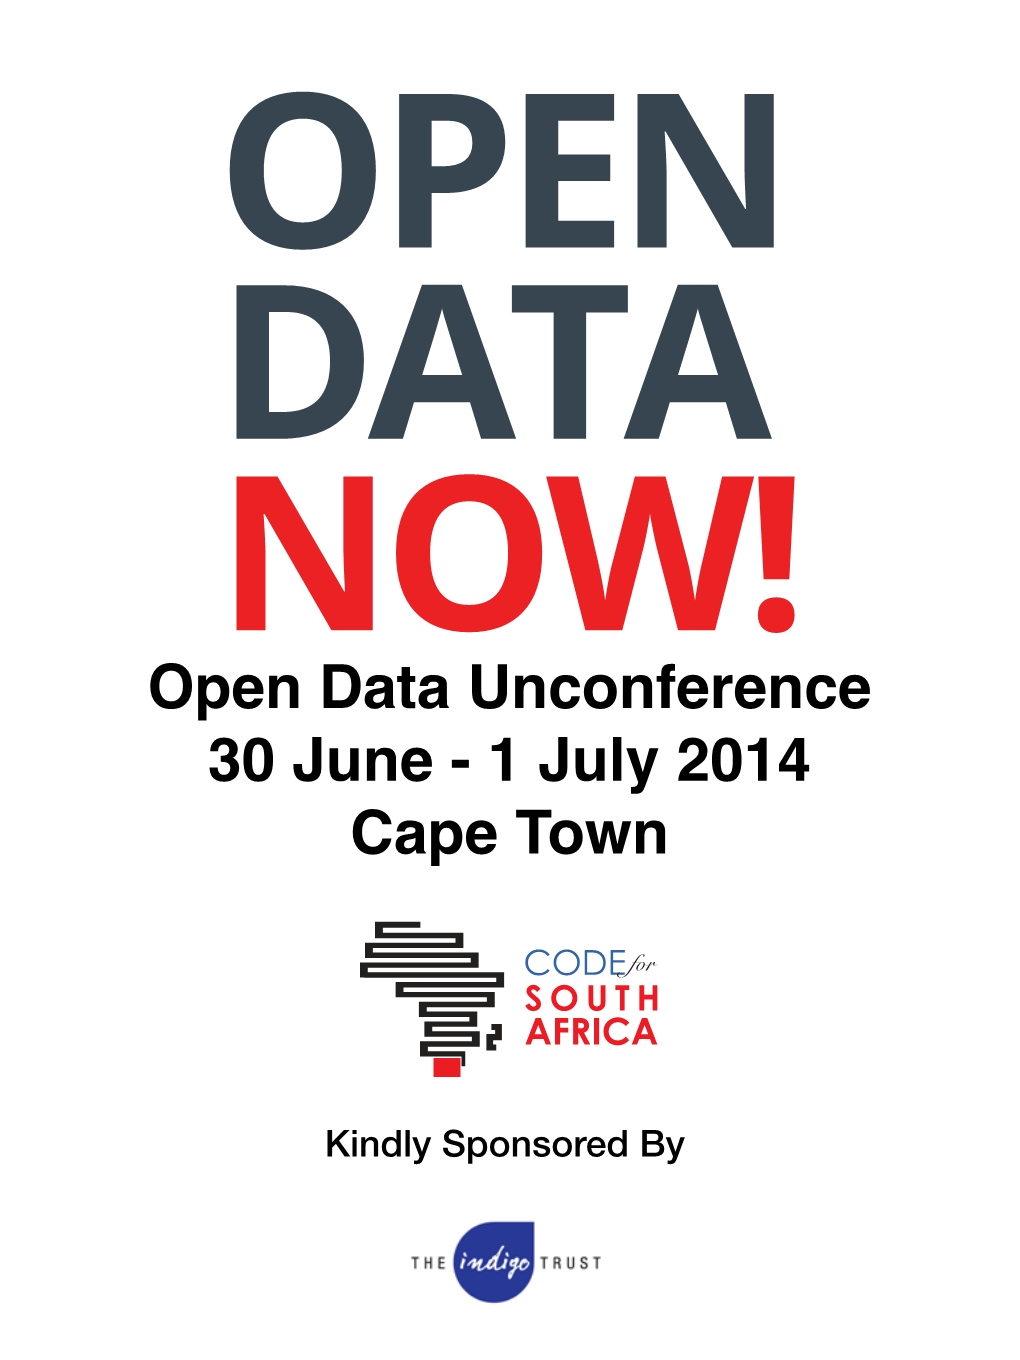 Open Data Unconference 30 June - 1 July 2014 Cape Town